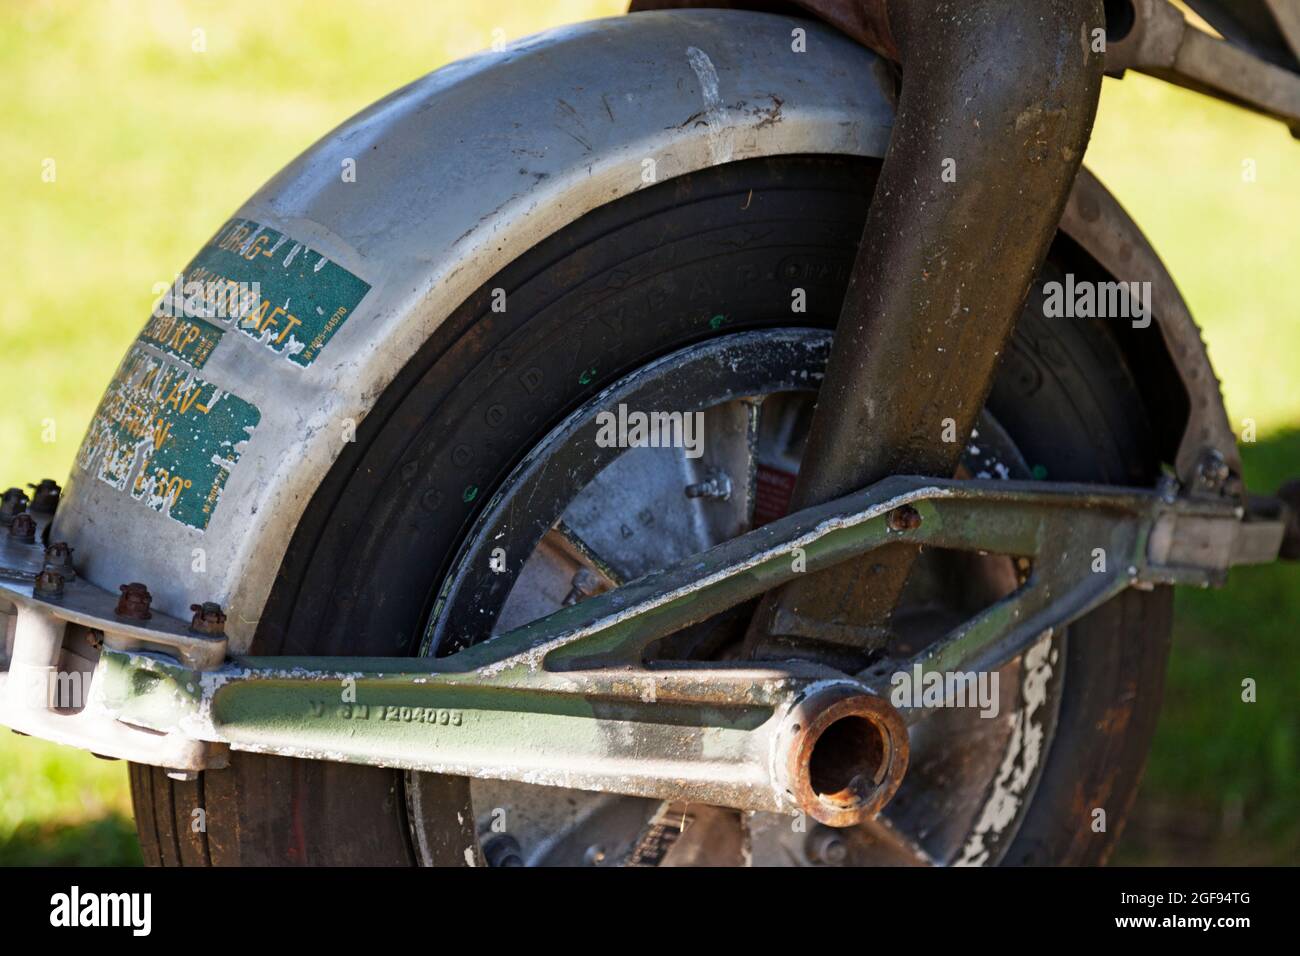 Vannas, Norrland Sweden - August 7, 2021: the front wheel of a fighter jet Stock Photo